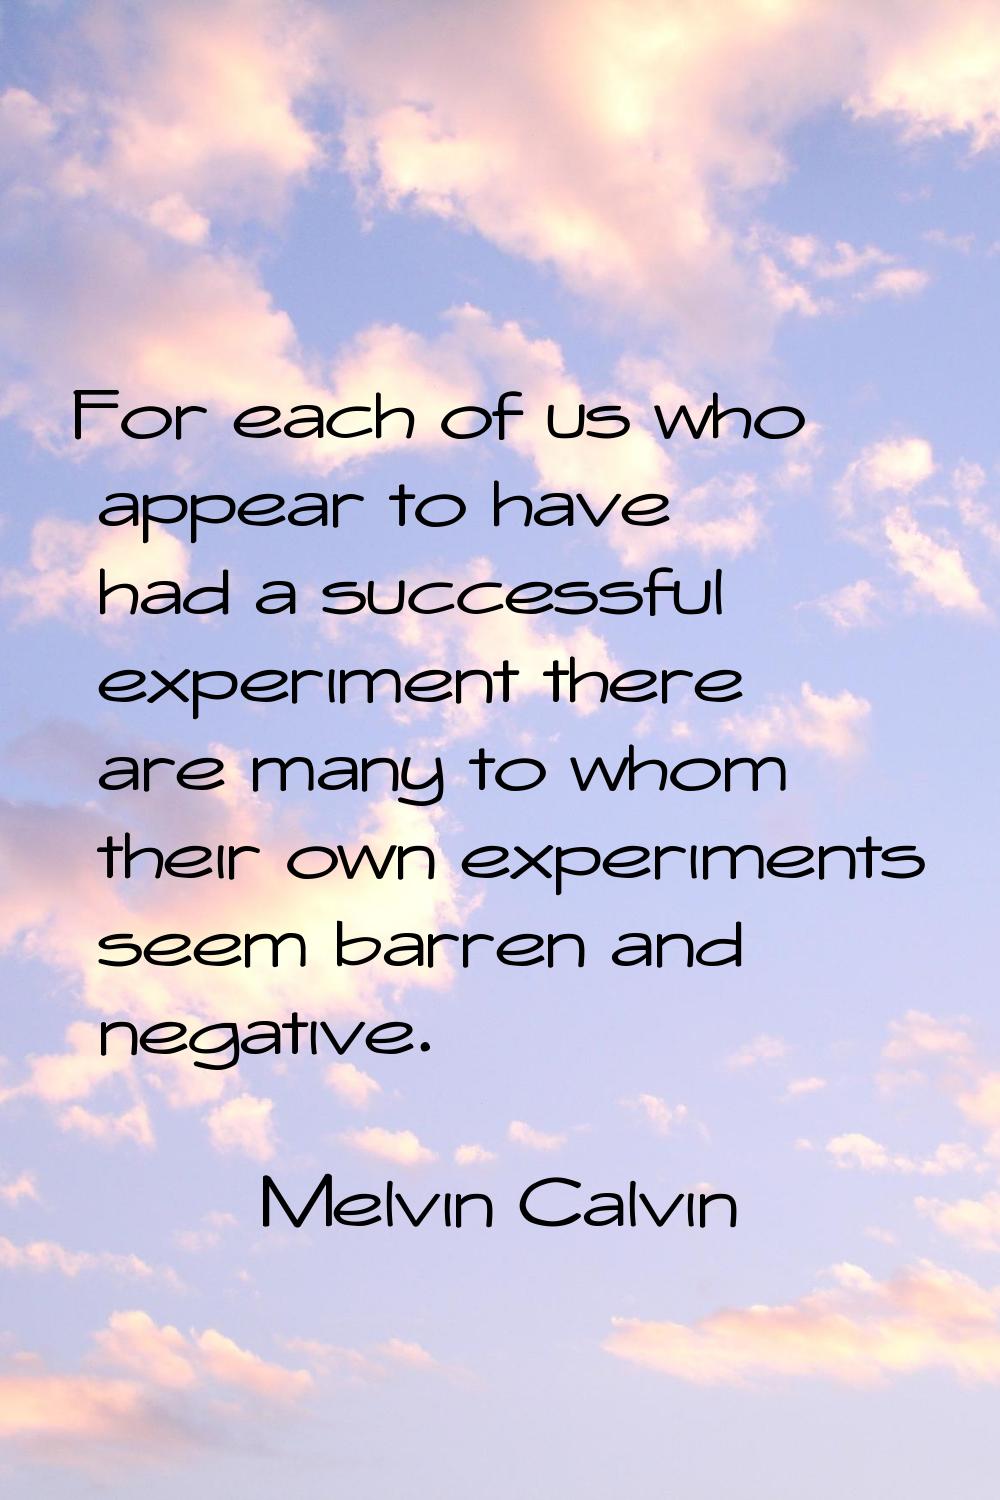 For each of us who appear to have had a successful experiment there are many to whom their own expe